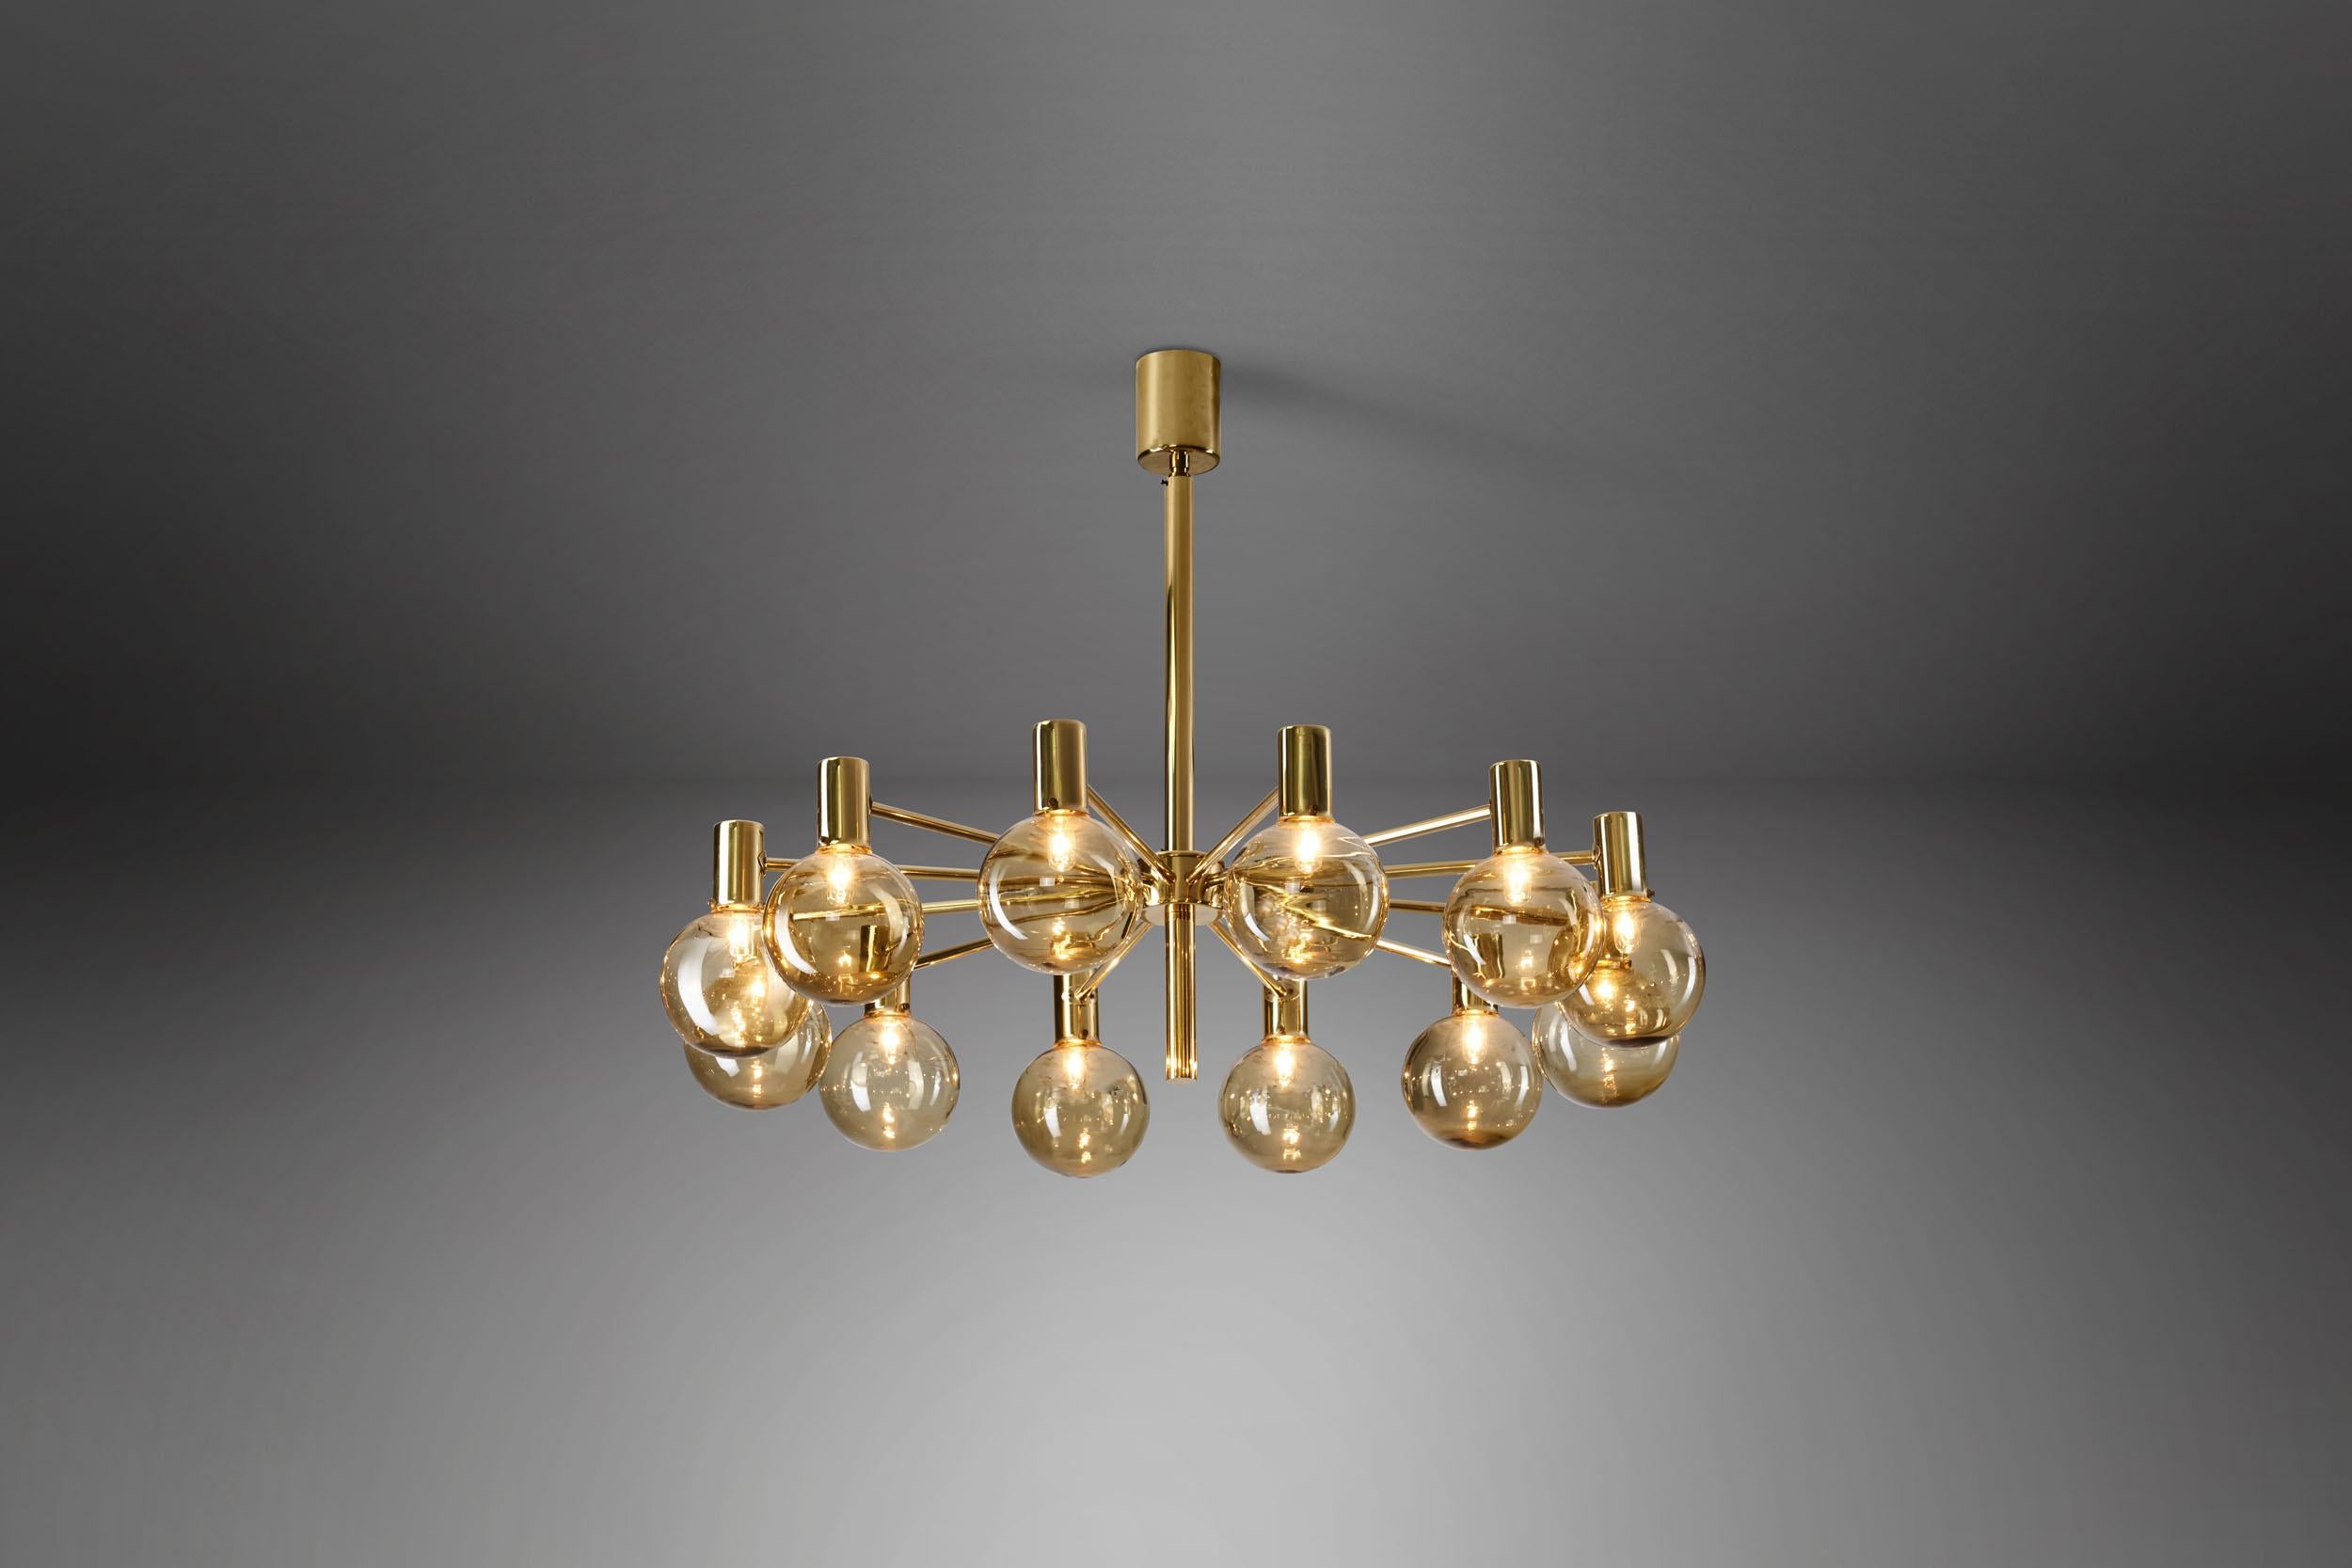 This marvellous, brass twelve-light chandelier was created in what we now call “the golden age of Scandinavian design”. Hans-Agne Jakobsson was the great Swedish master of lighting, designing some of the most recognizable Mid-Century Modern lamps of